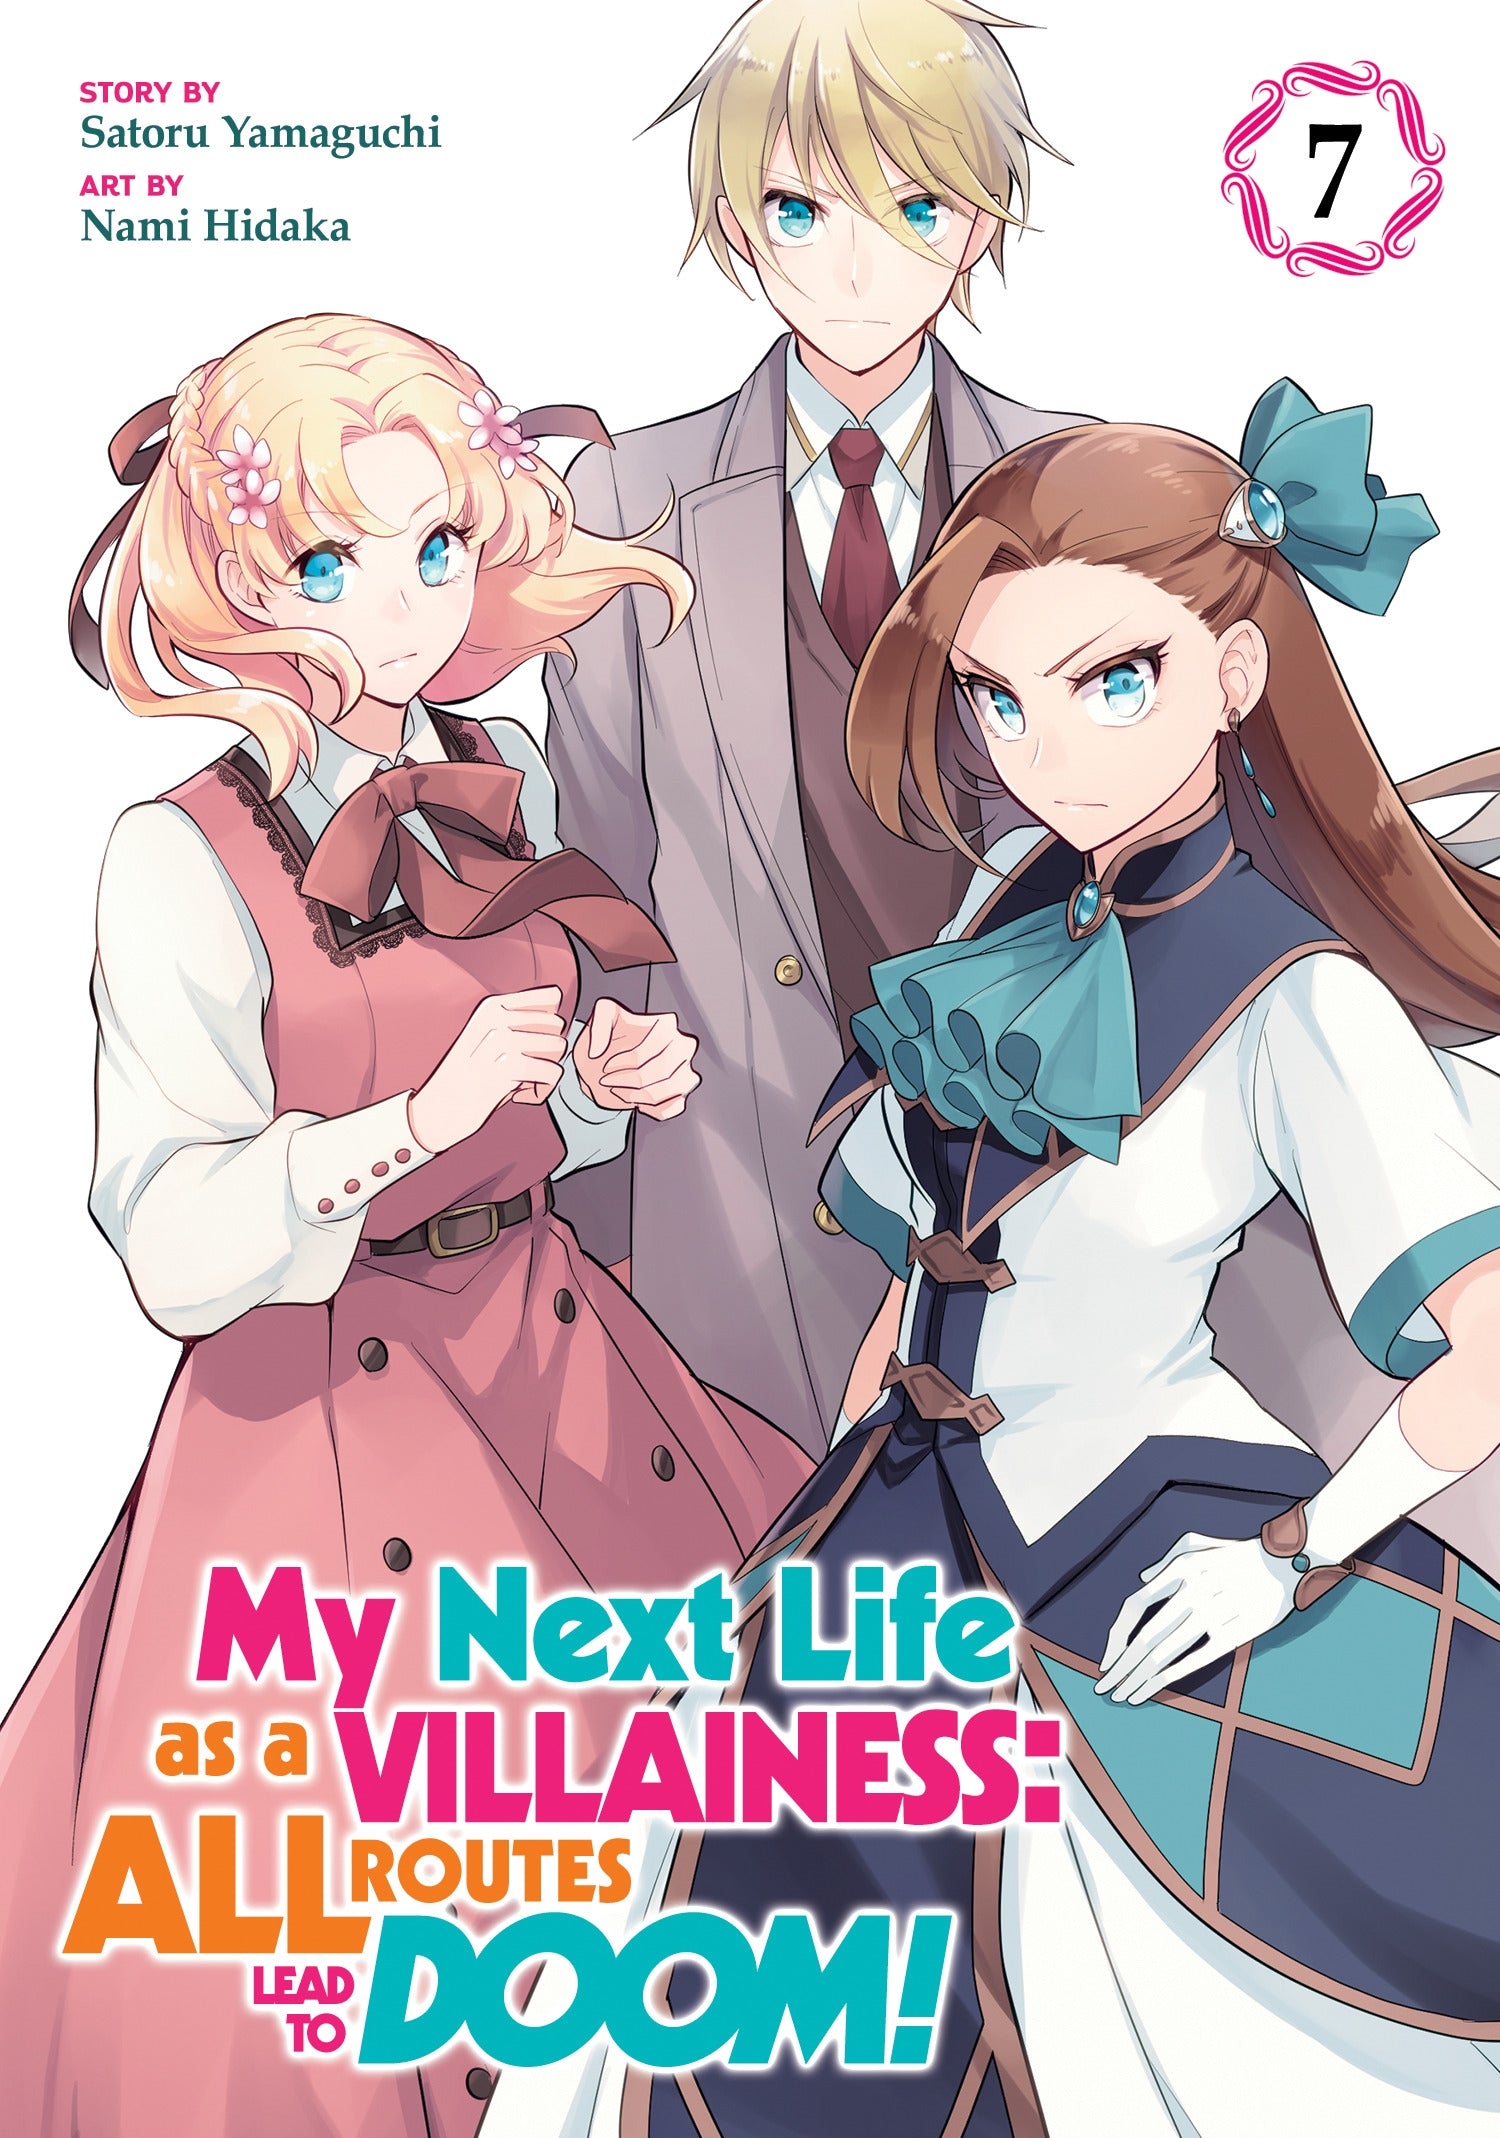 My Next Life as a Villainess All Routes Lead to Doom! (Manga) Vol. 7